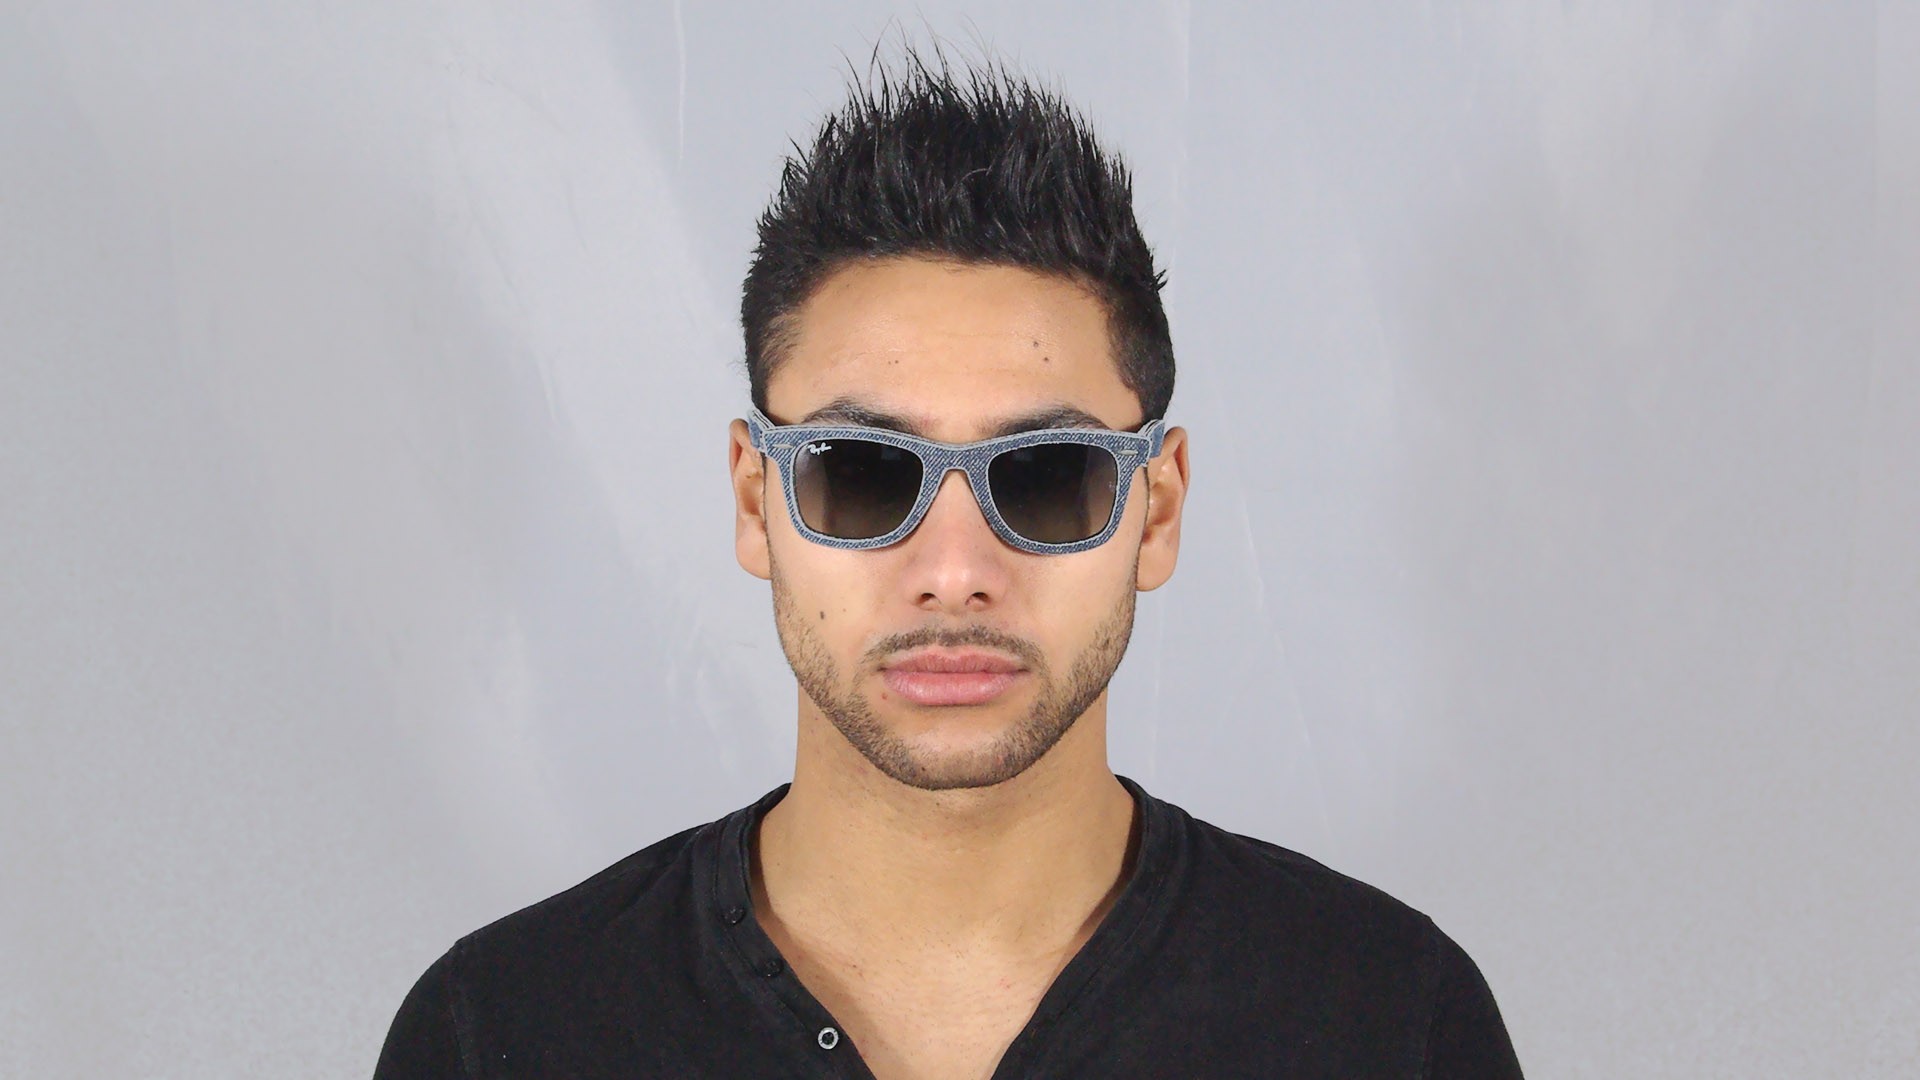 ray ban jeans sunglasses